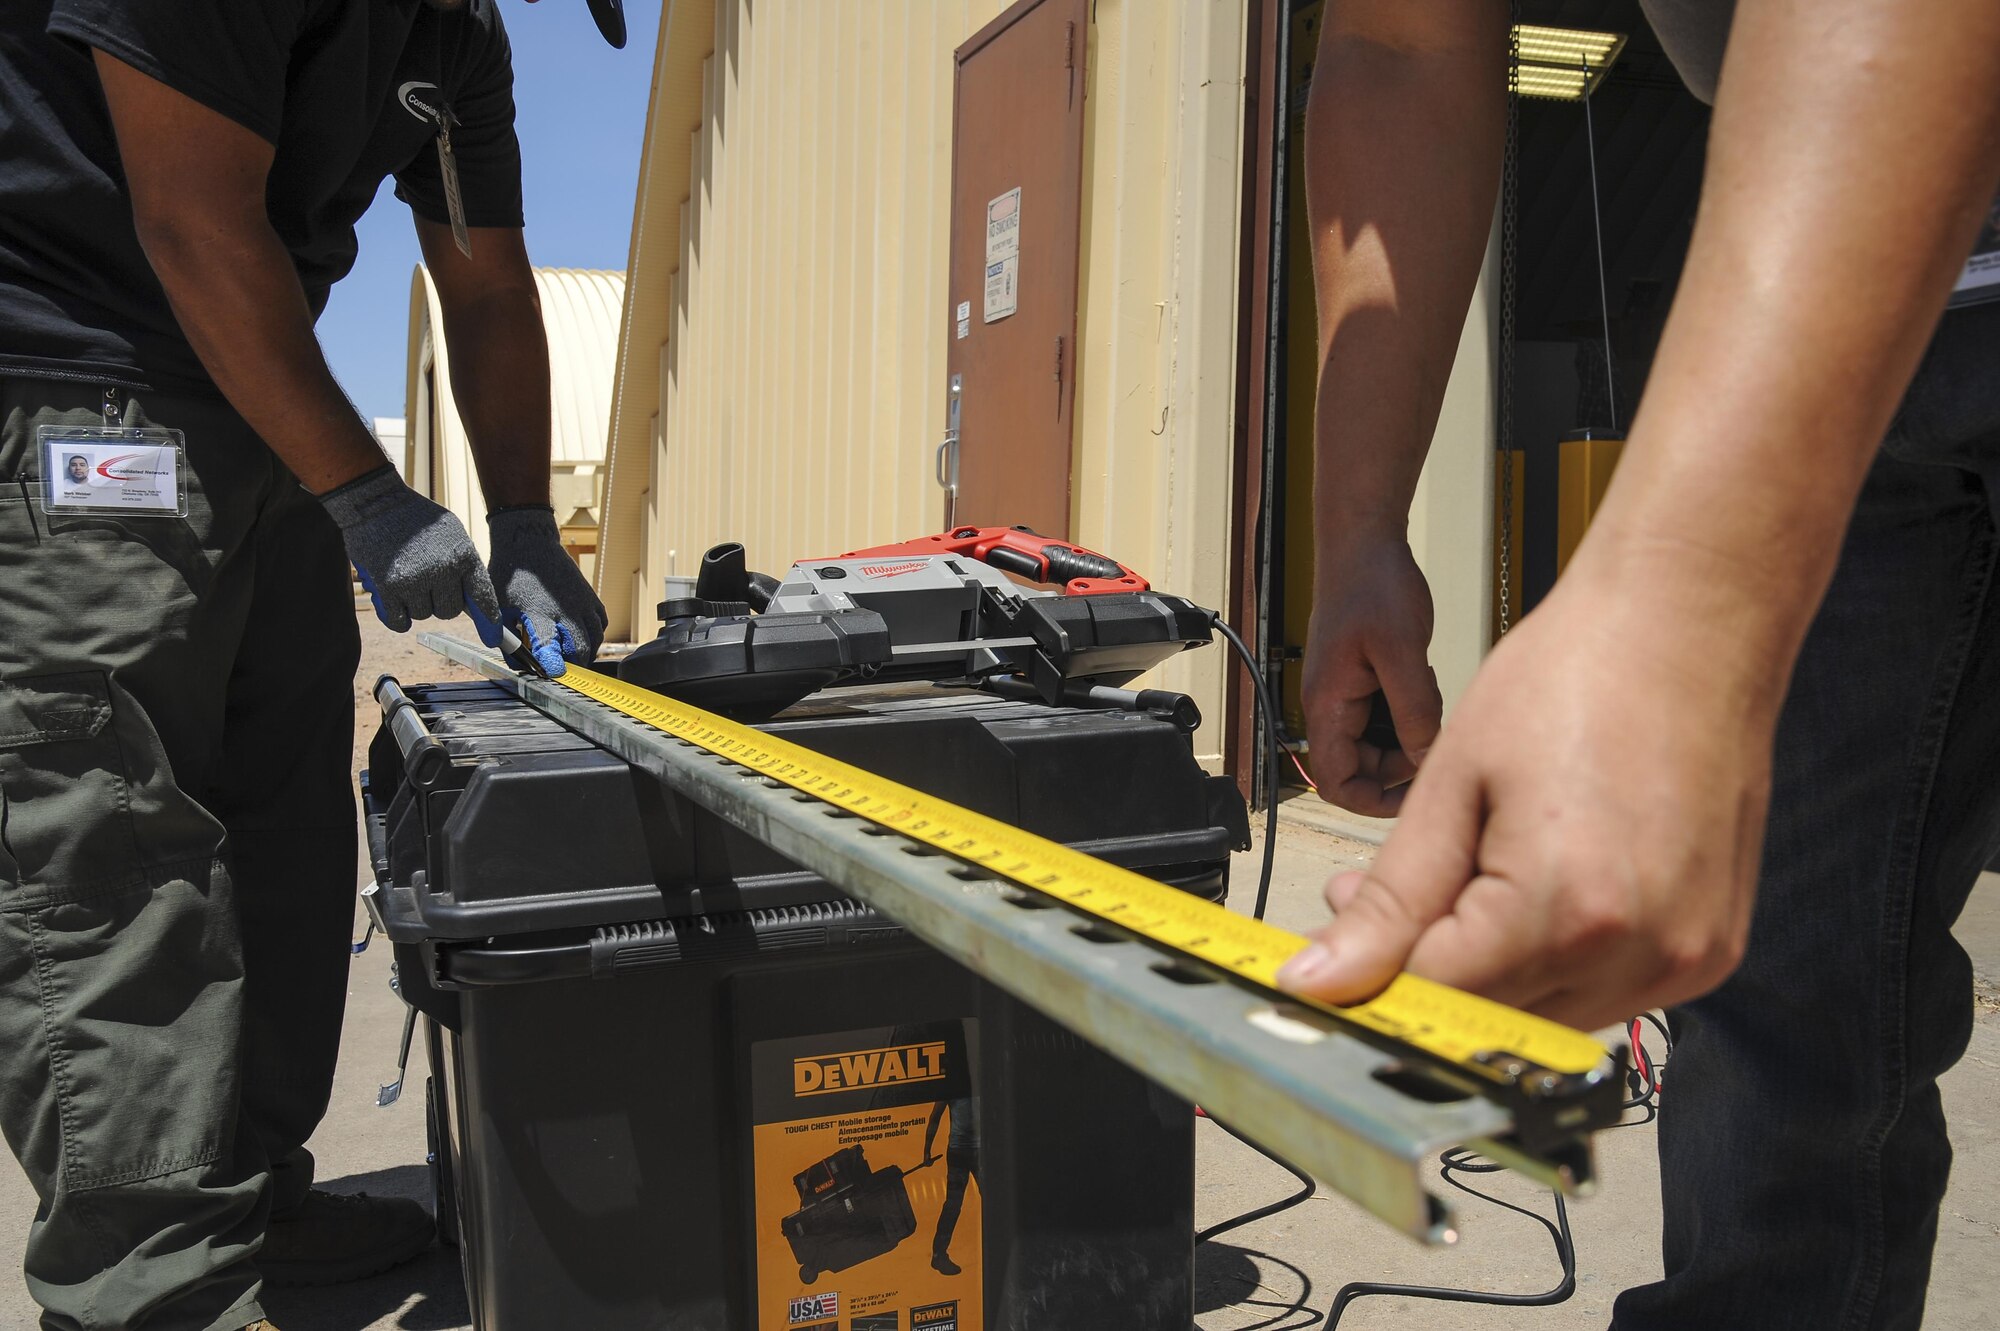 Brodie Carrier and Mark Webber, Consolidated Networks fiber technicians, take measurements for a bracket for a communications cabinet installation at the 309th Aircraft Maintenance and Regeneration Group at Davis-Monthan Air Force Base, Ariz., May 24, 2017. The fiber technicians can reinstall up to two communications cabinets in a day. (U.S. Air Force photo by Senior Airman Mya M. Crosby)